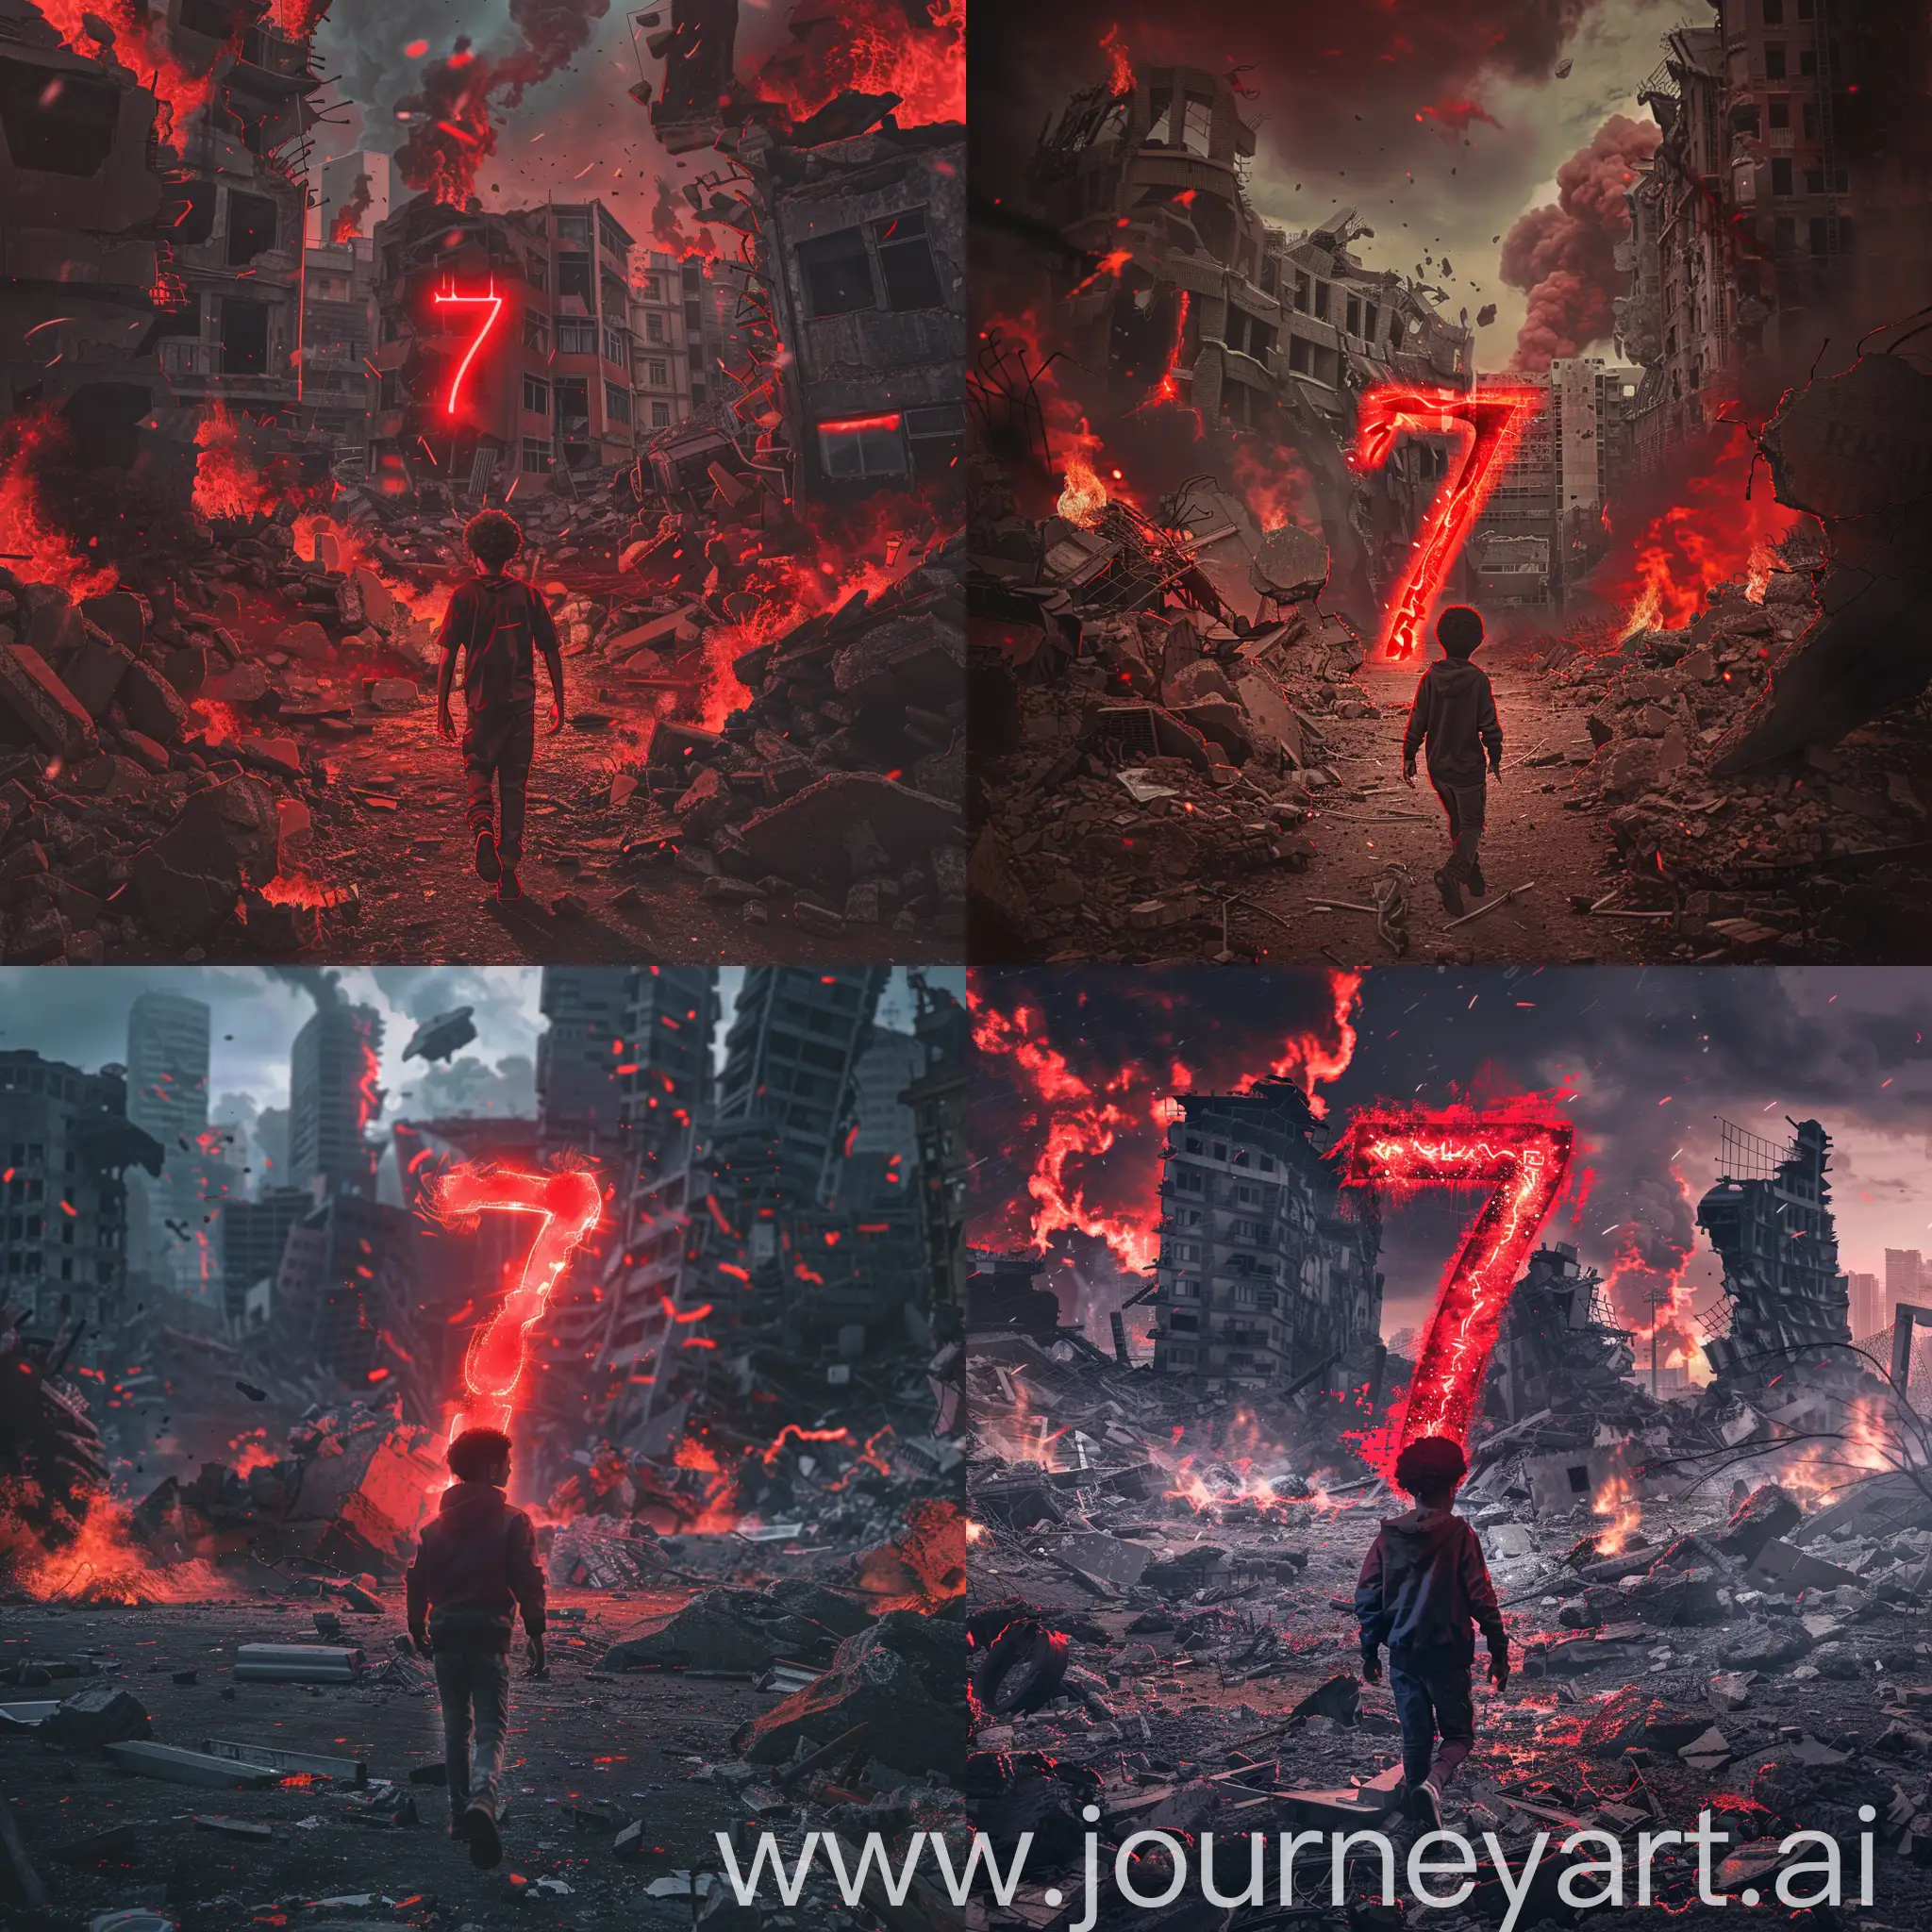 Apocalyptic-Transformation-Empowered-Journey-Amidst-Ruins